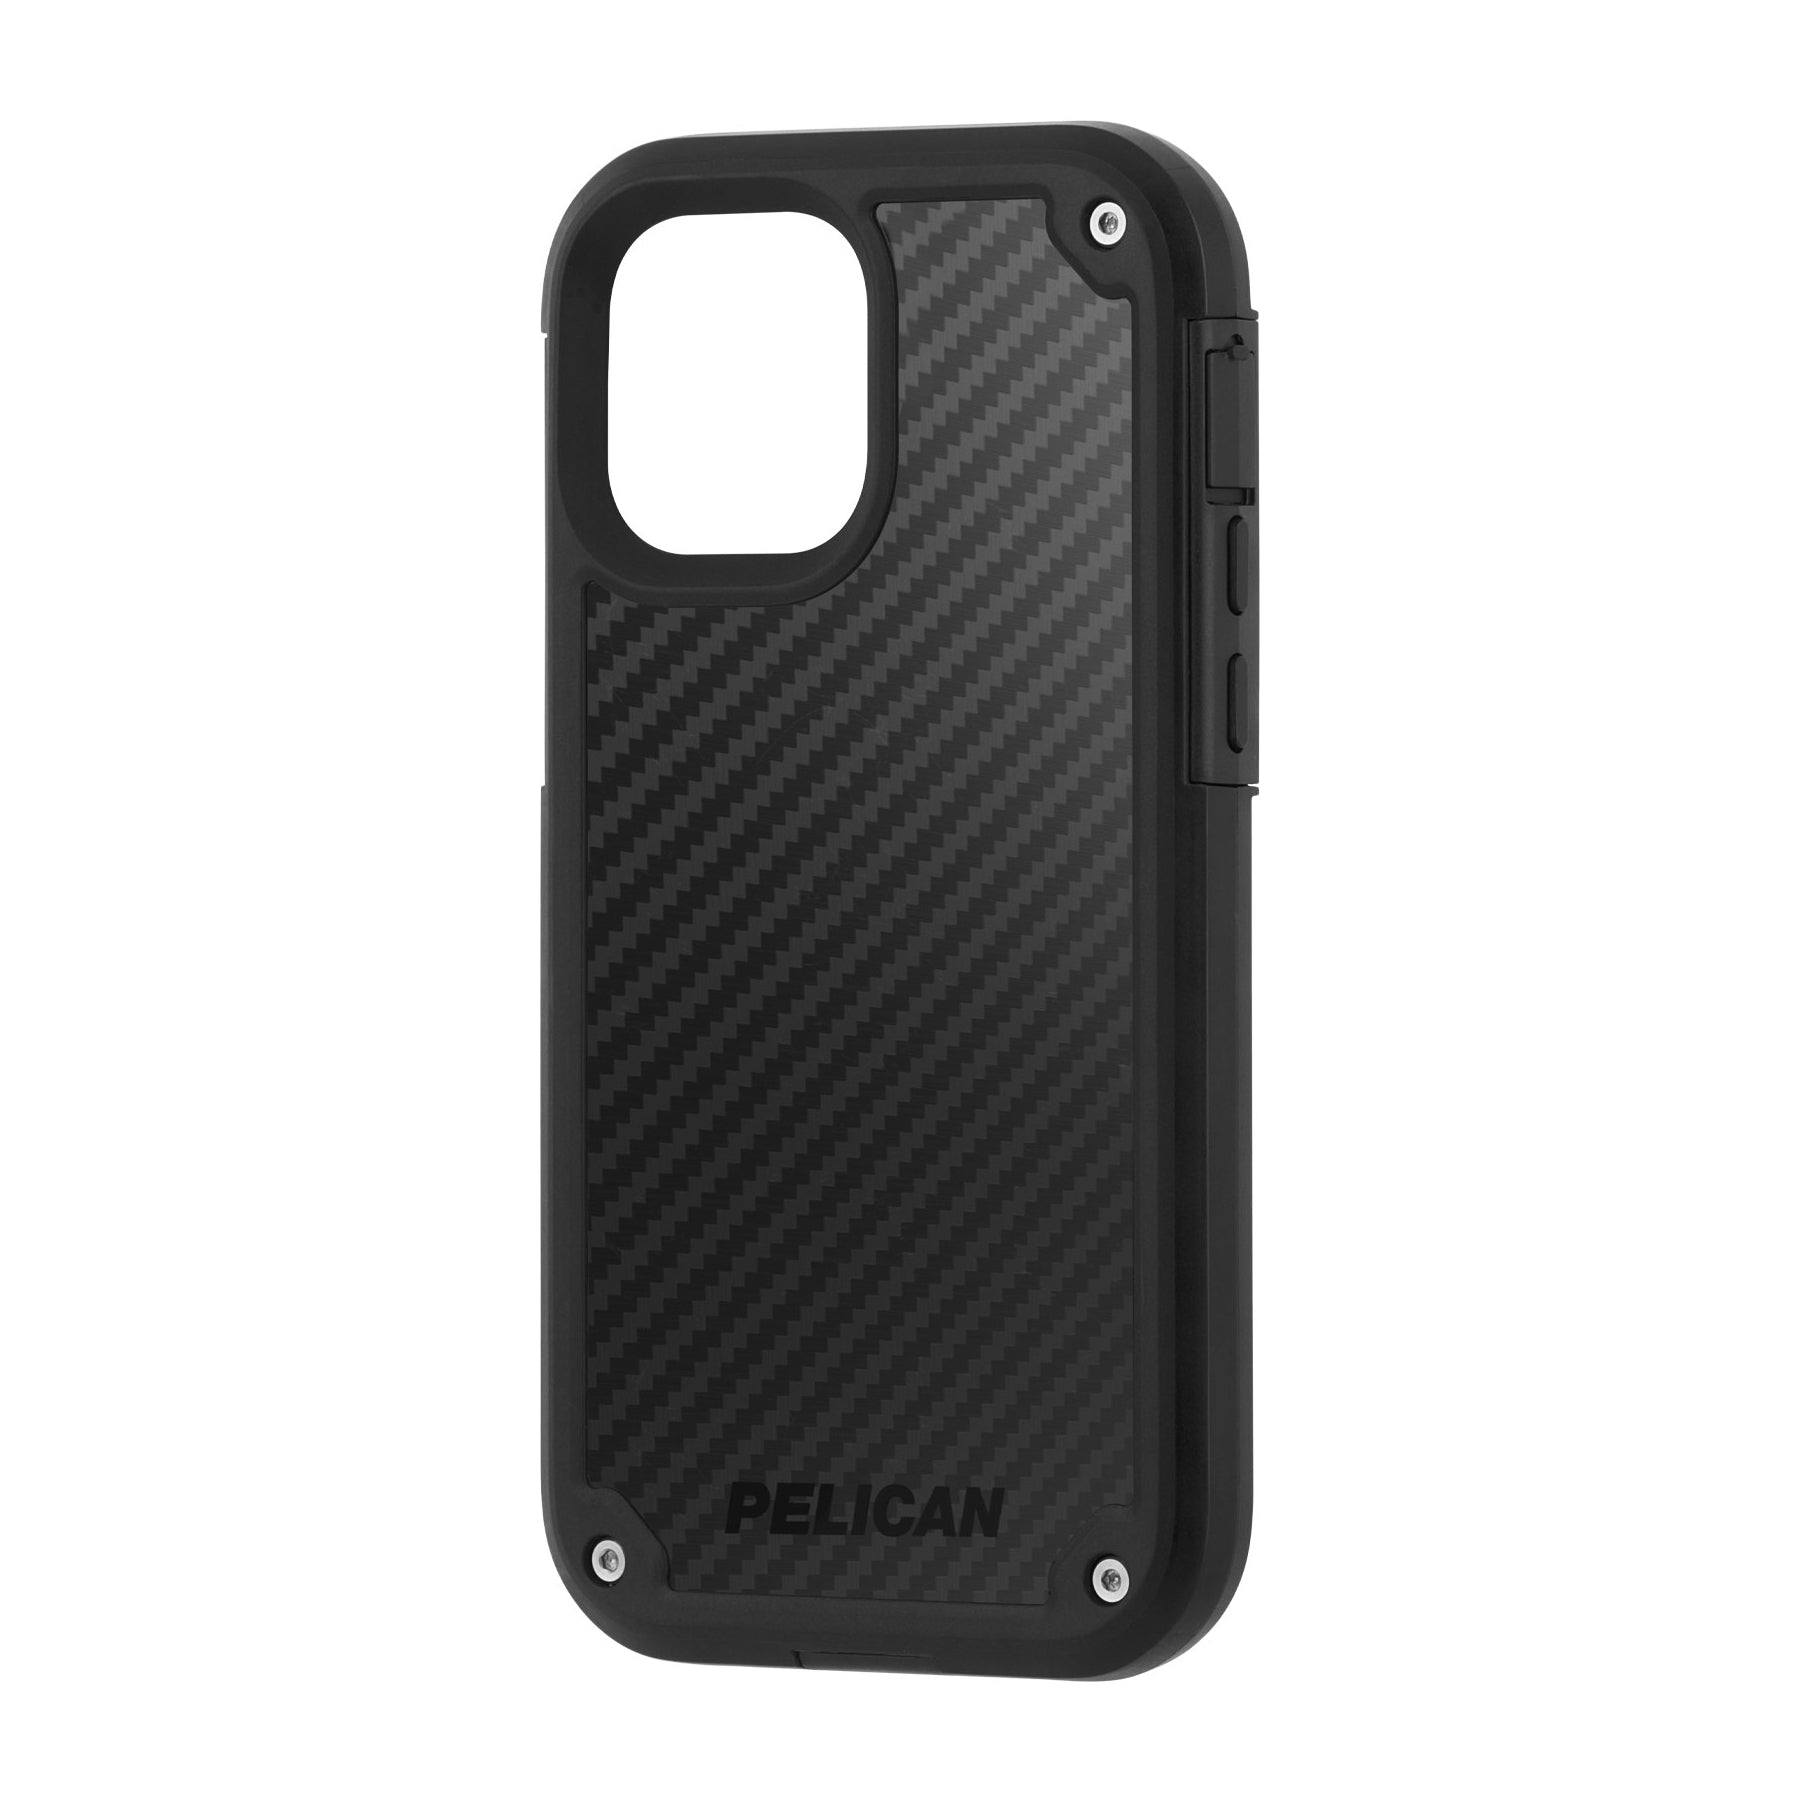 Pelican Shield Ultra Protecive Case + Holster For iPhone iPhone 12 / 12 Pro - Mac Addict